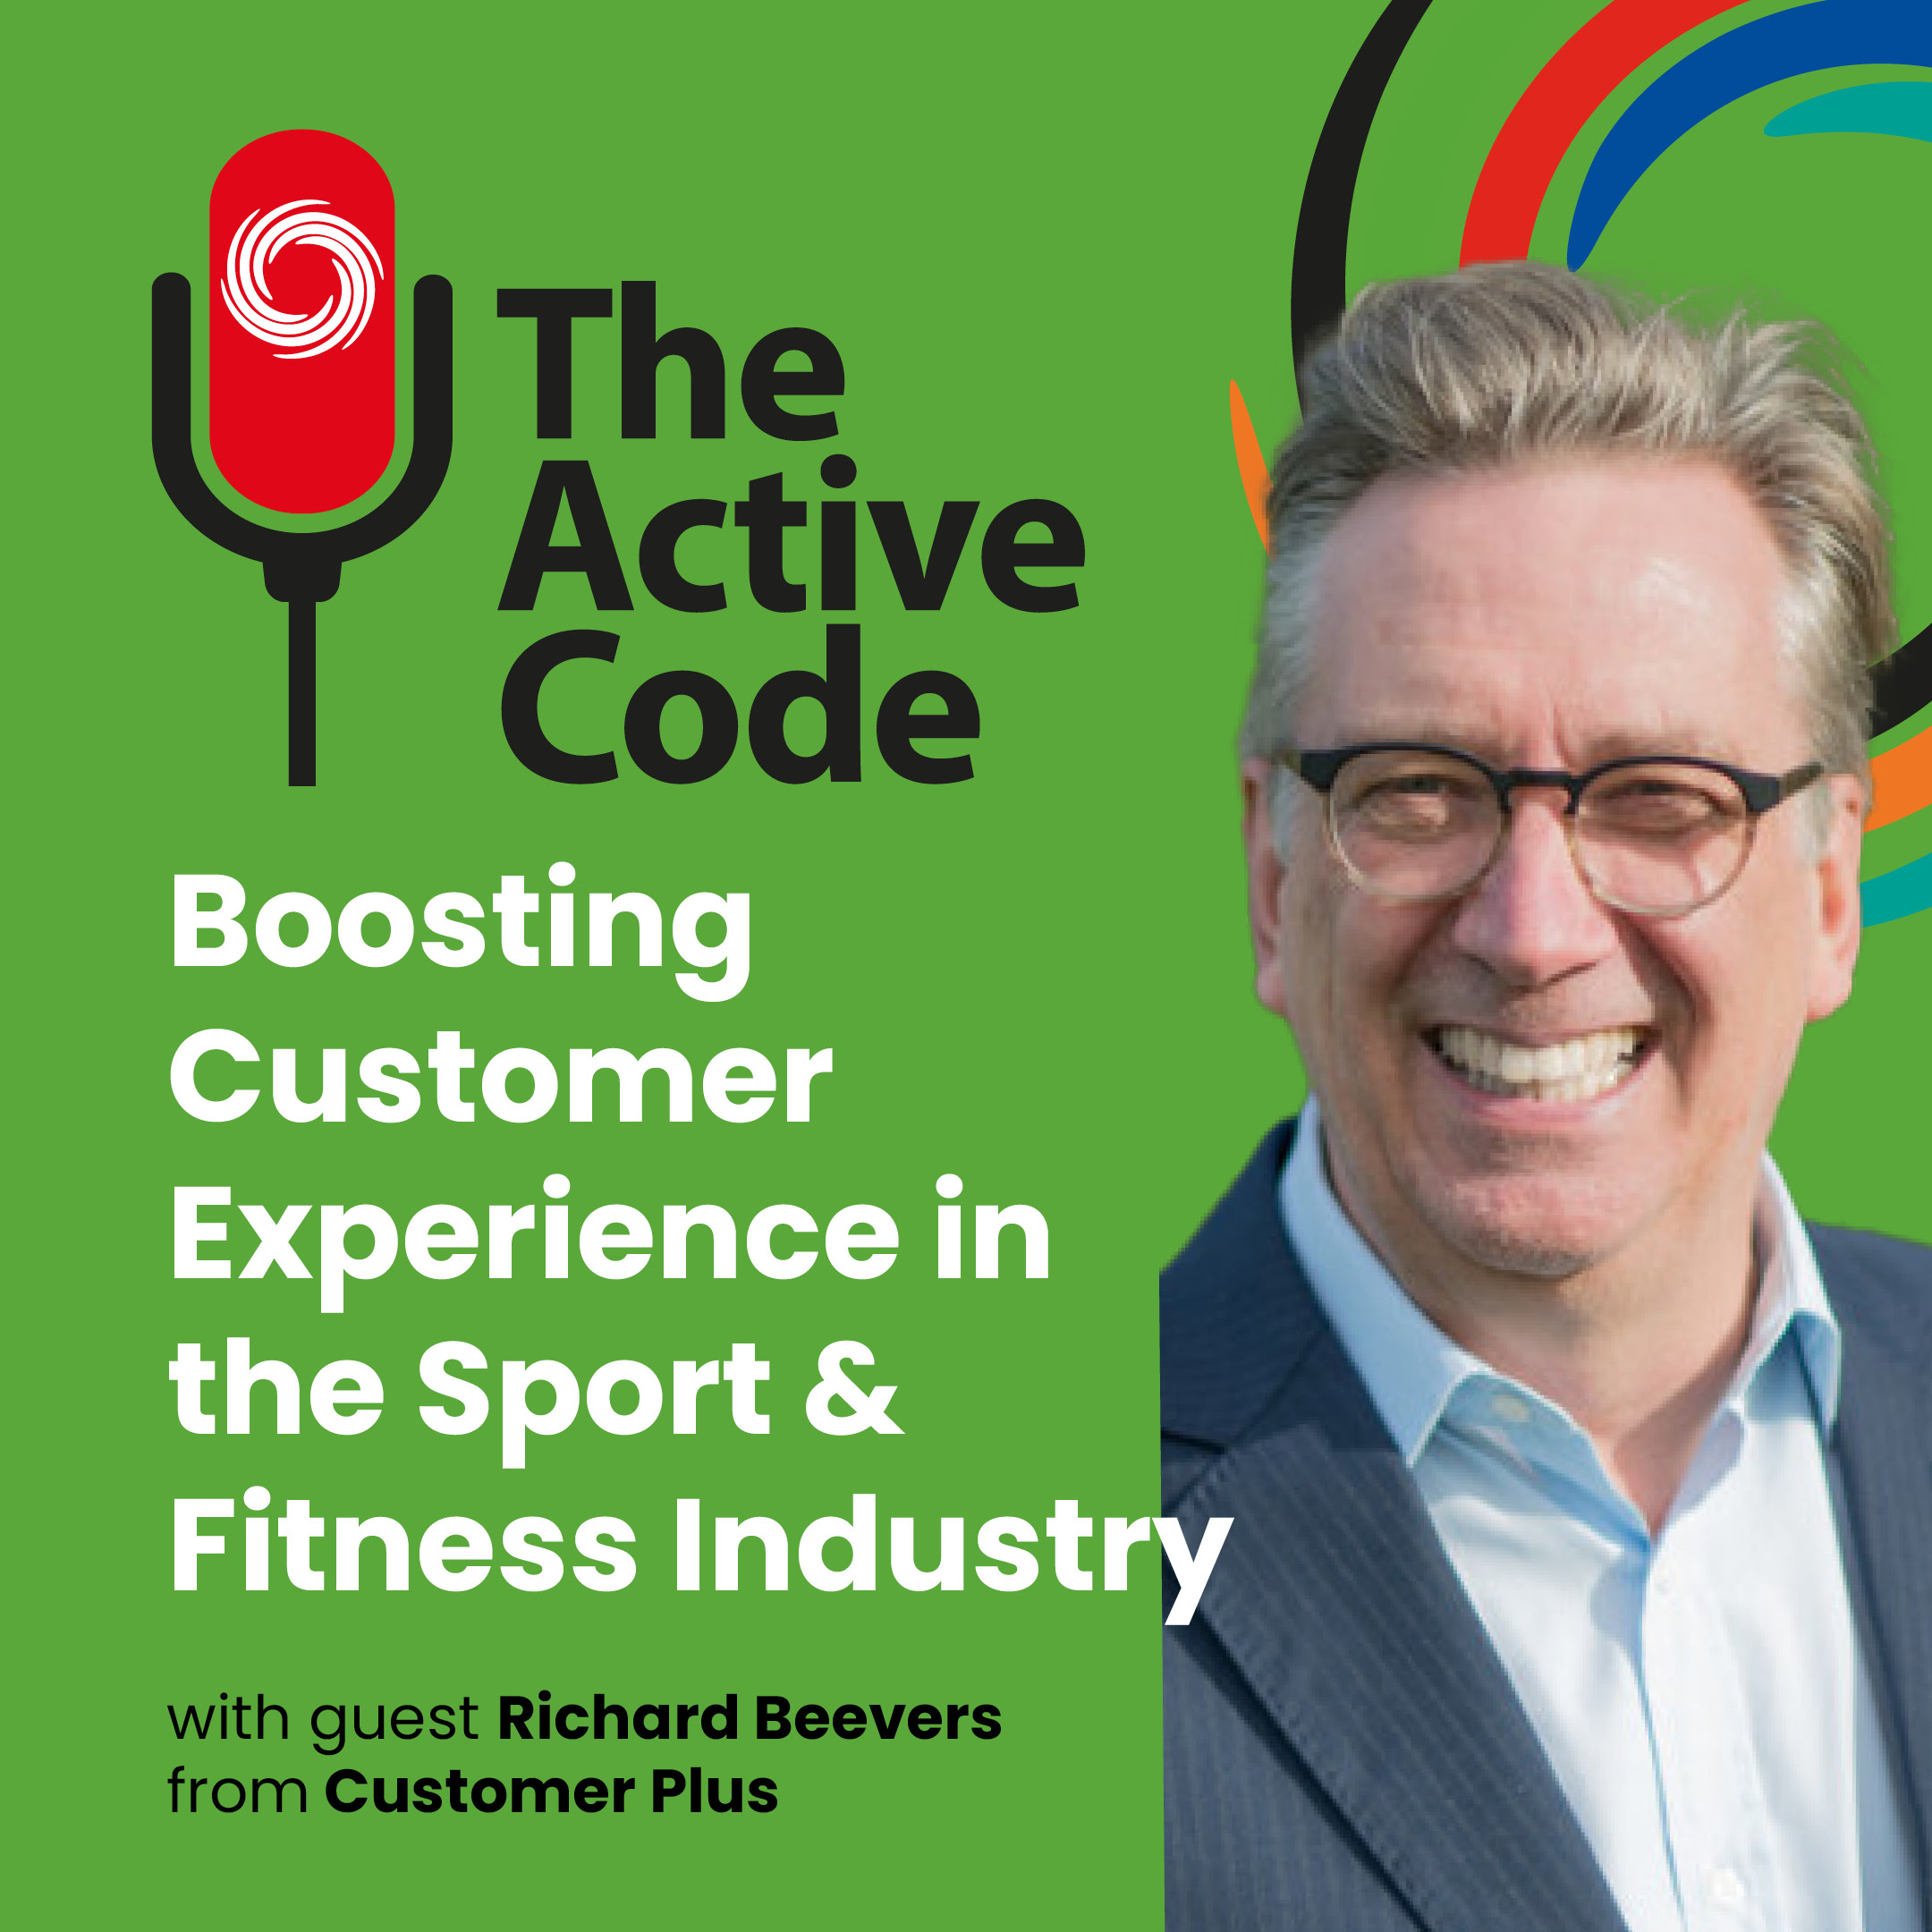 The Active Code – Boosting Customer Experience in Sport & Fitness Industry